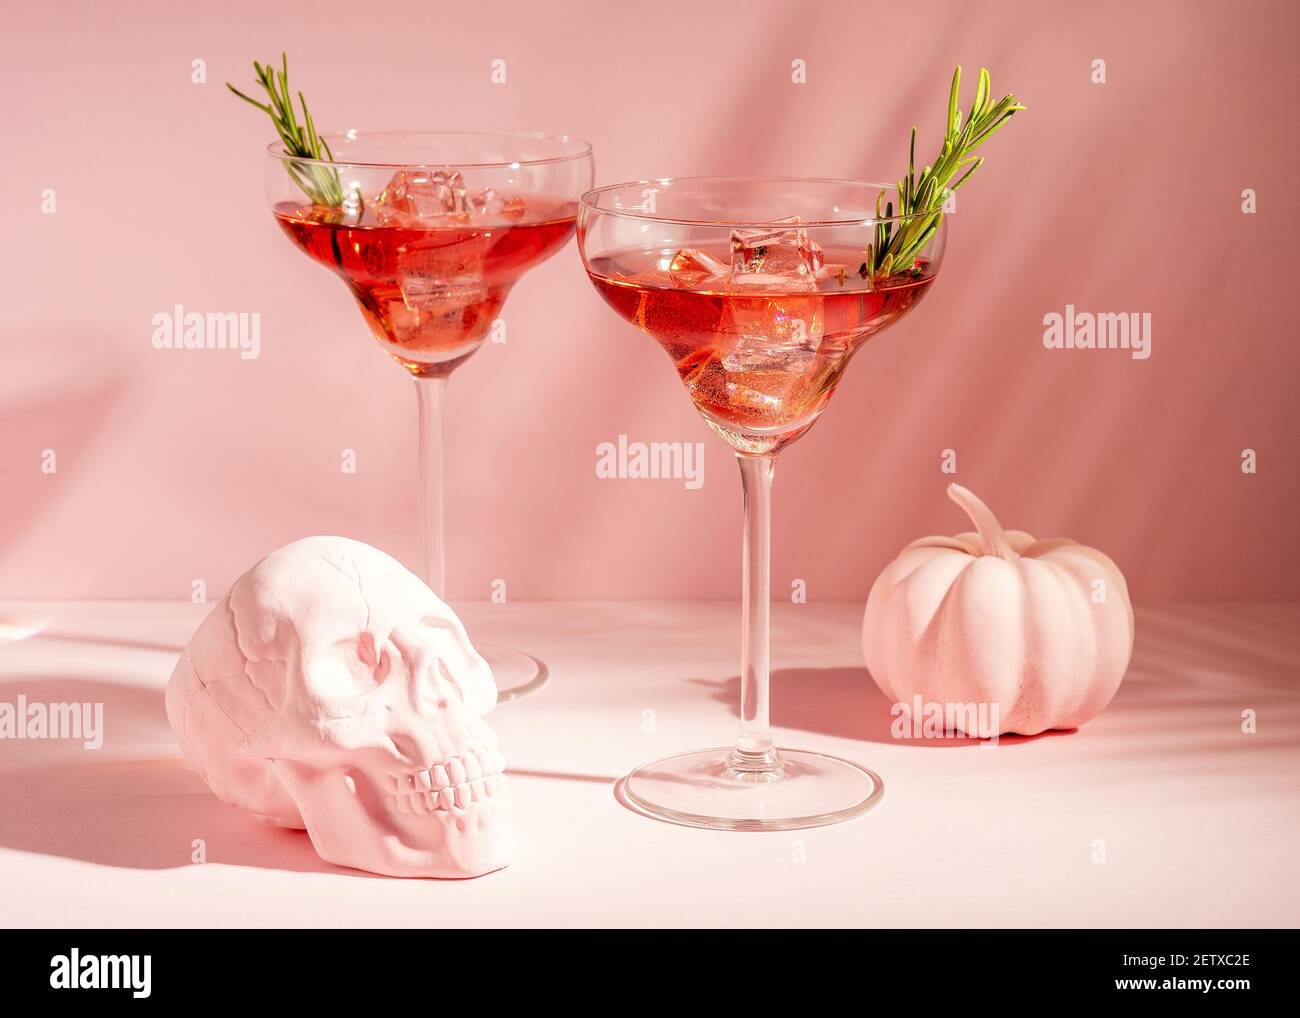 Halloween minimal concept with pink pumpkin, skull and cocktails. Creative holiday party background. Stock Photo